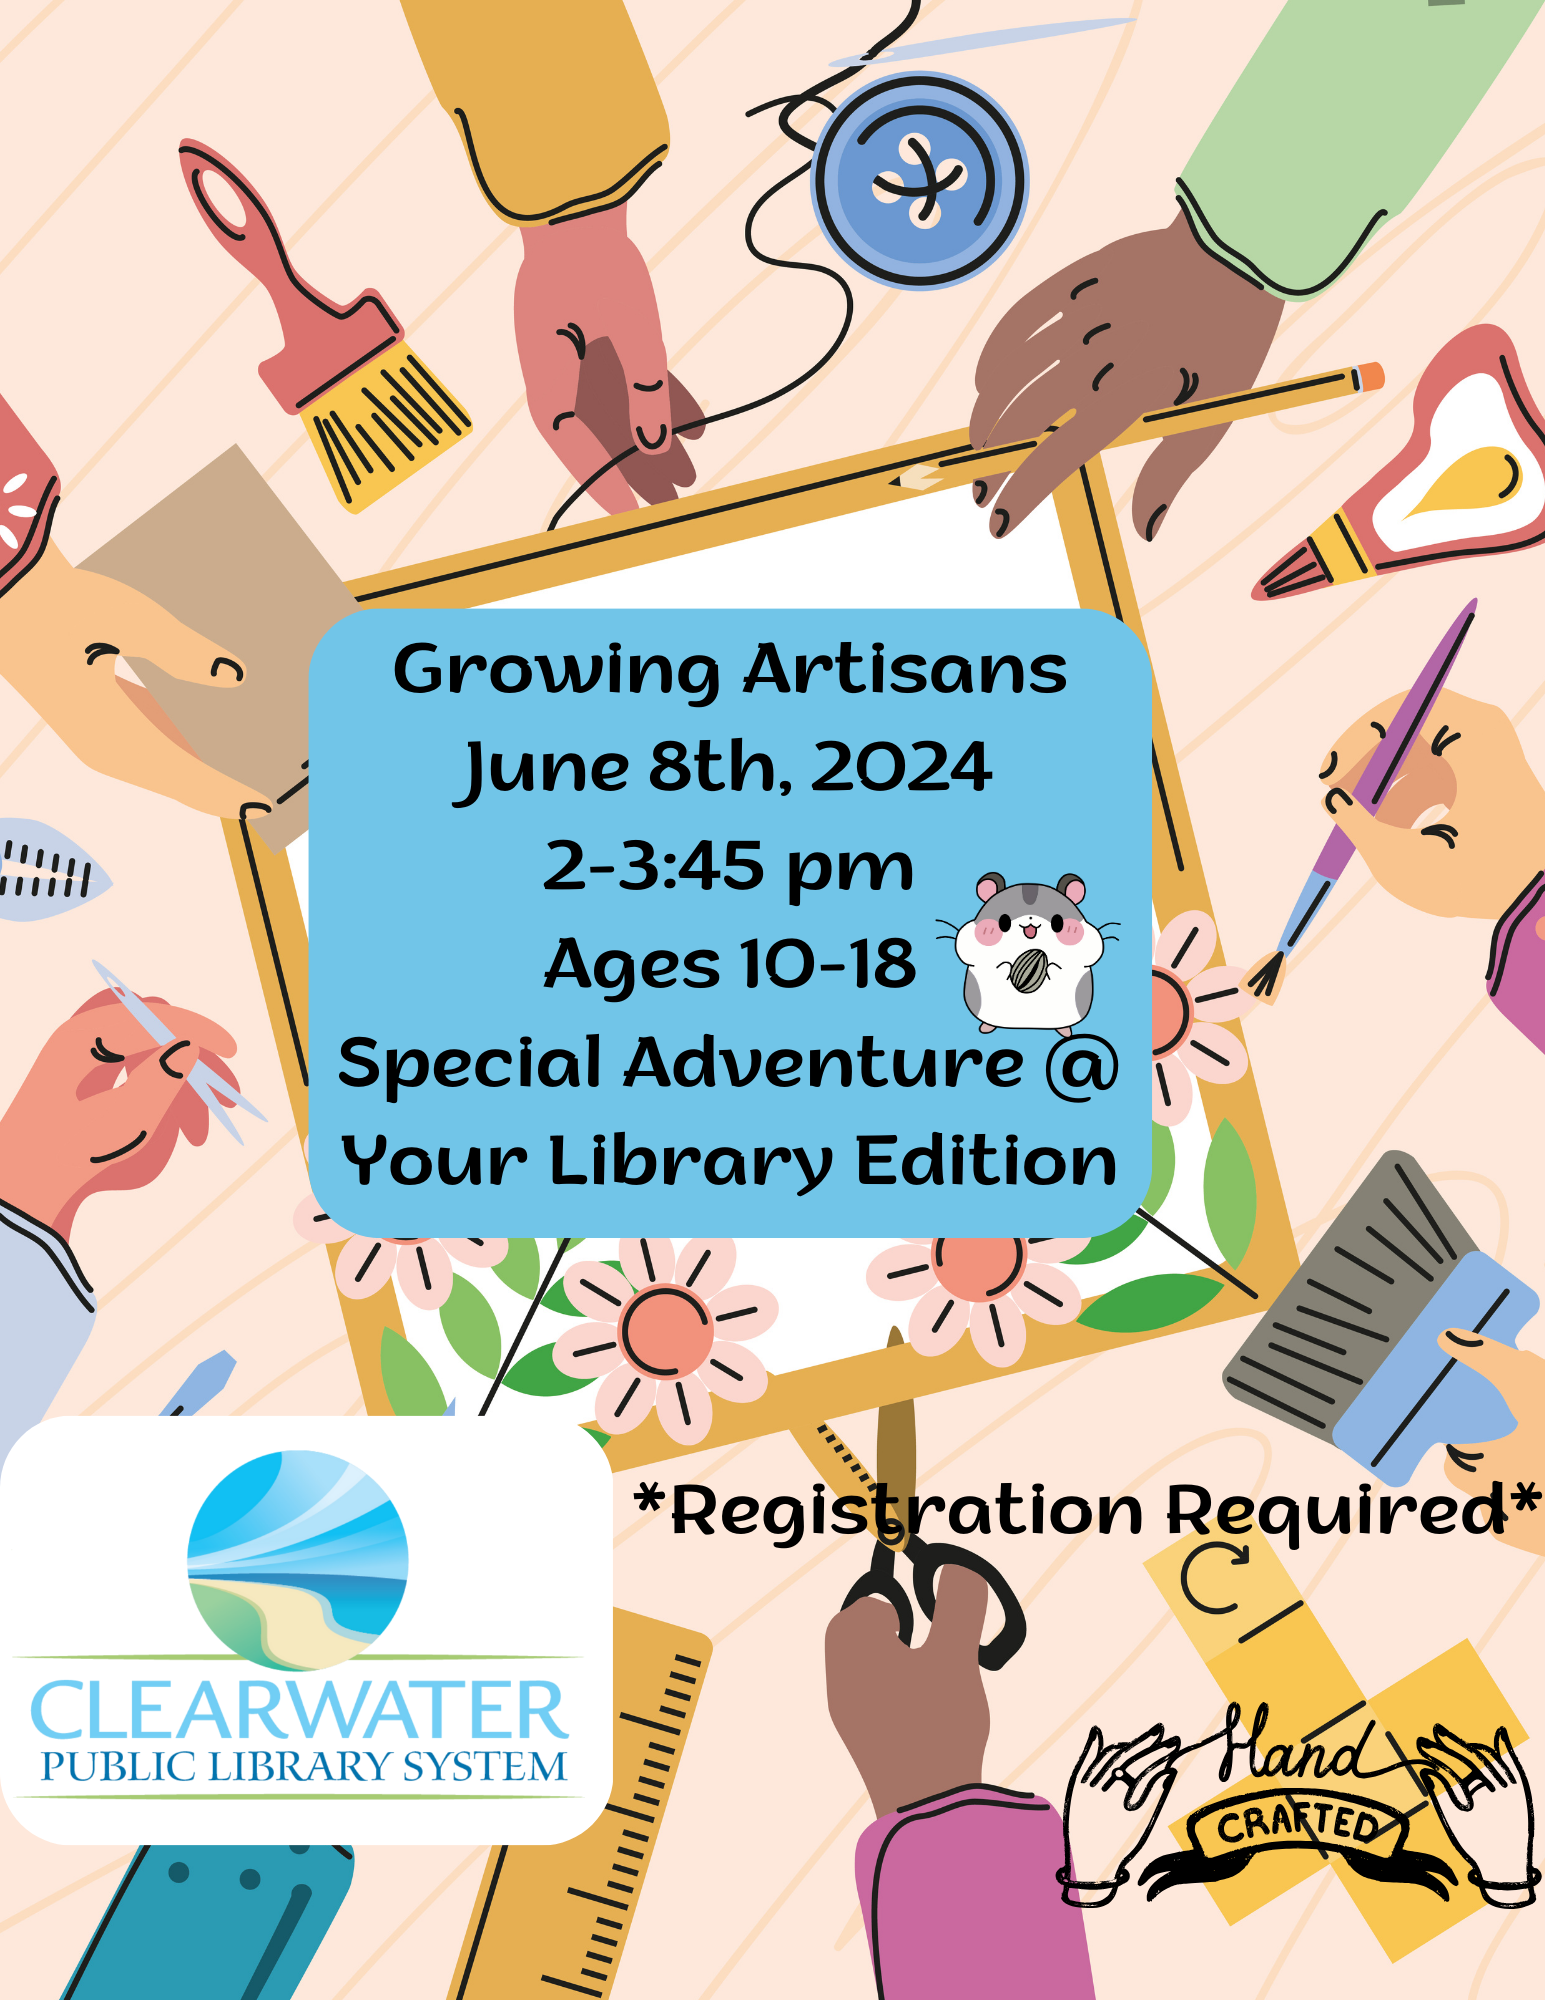 Hand crafting with craft materials and supplies, Growing Artisans June 8th, 2024 Adventure at Your Library Edition Ages 10-18 